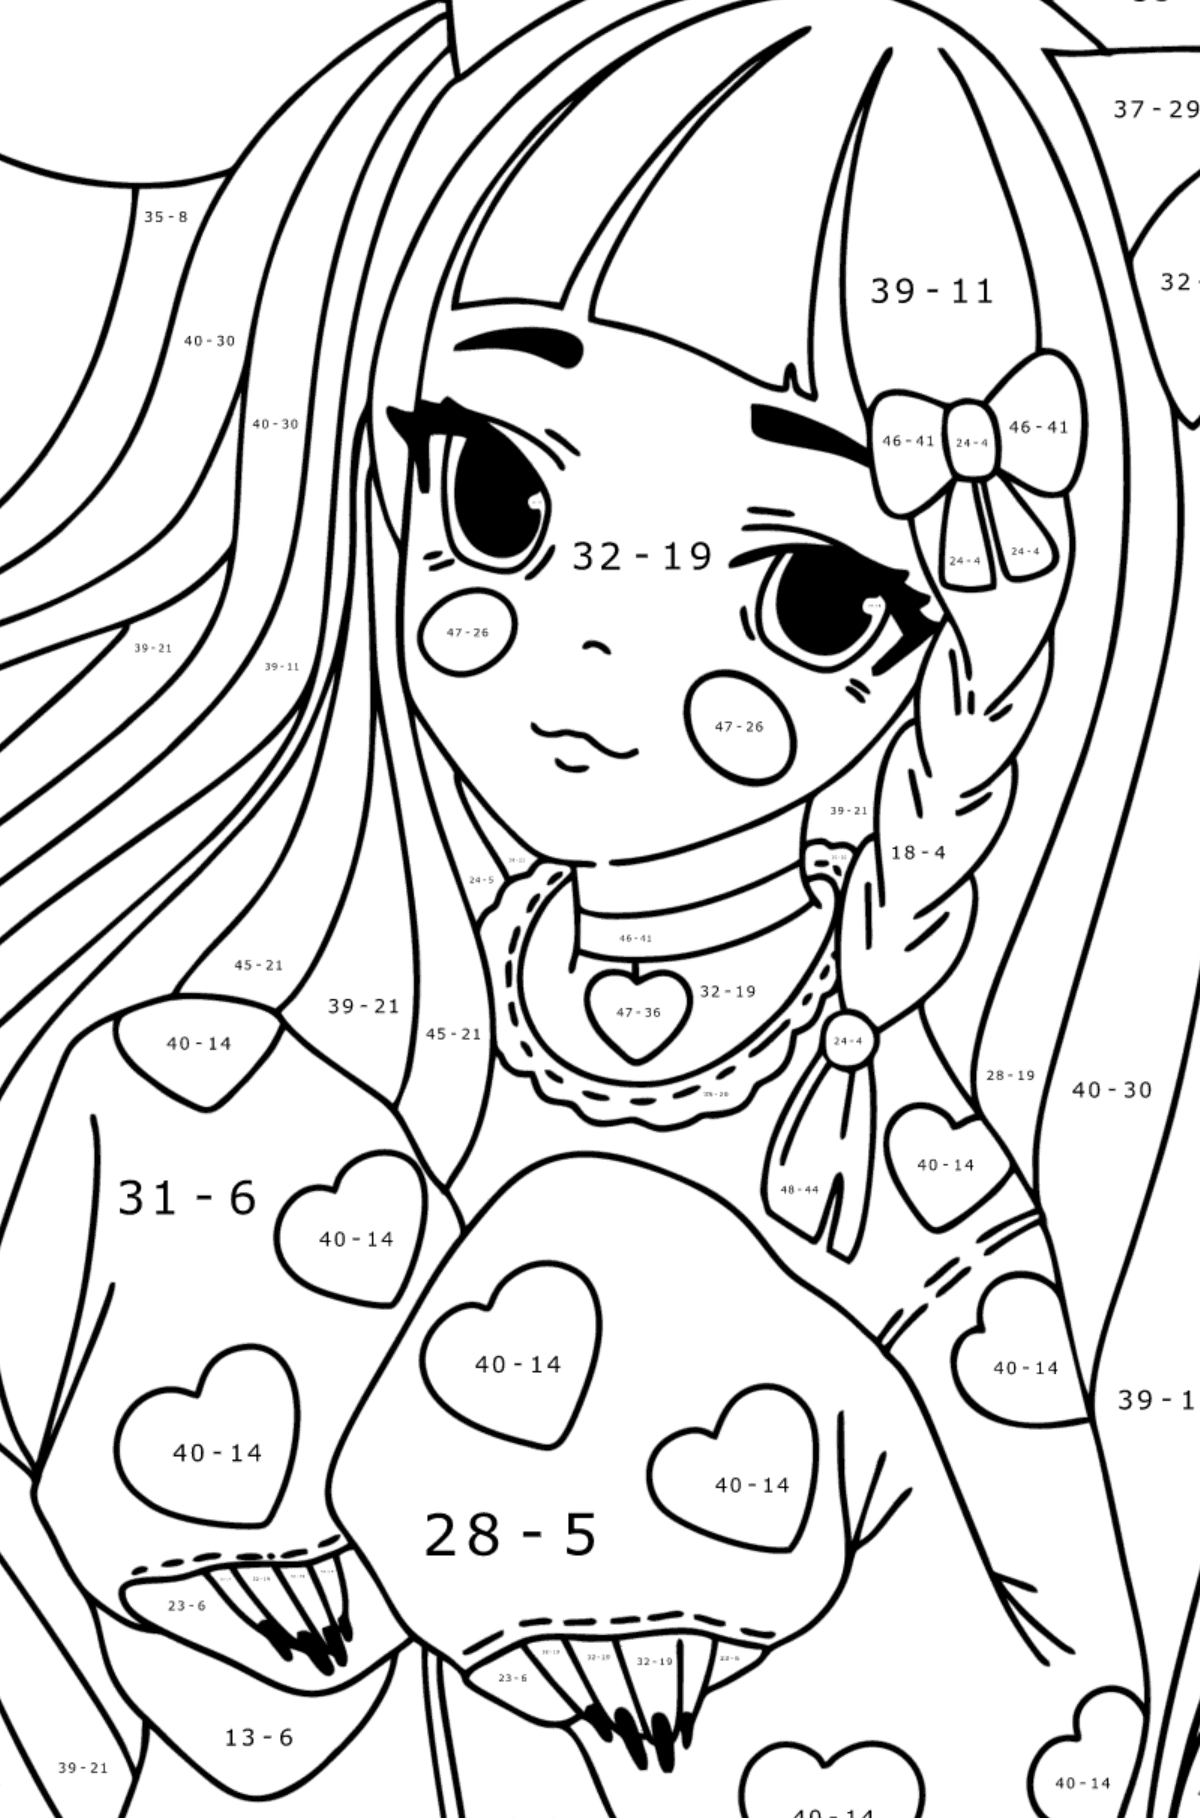 Anime girl with ears and paws coloring page - Math Coloring - Subtraction for Kids